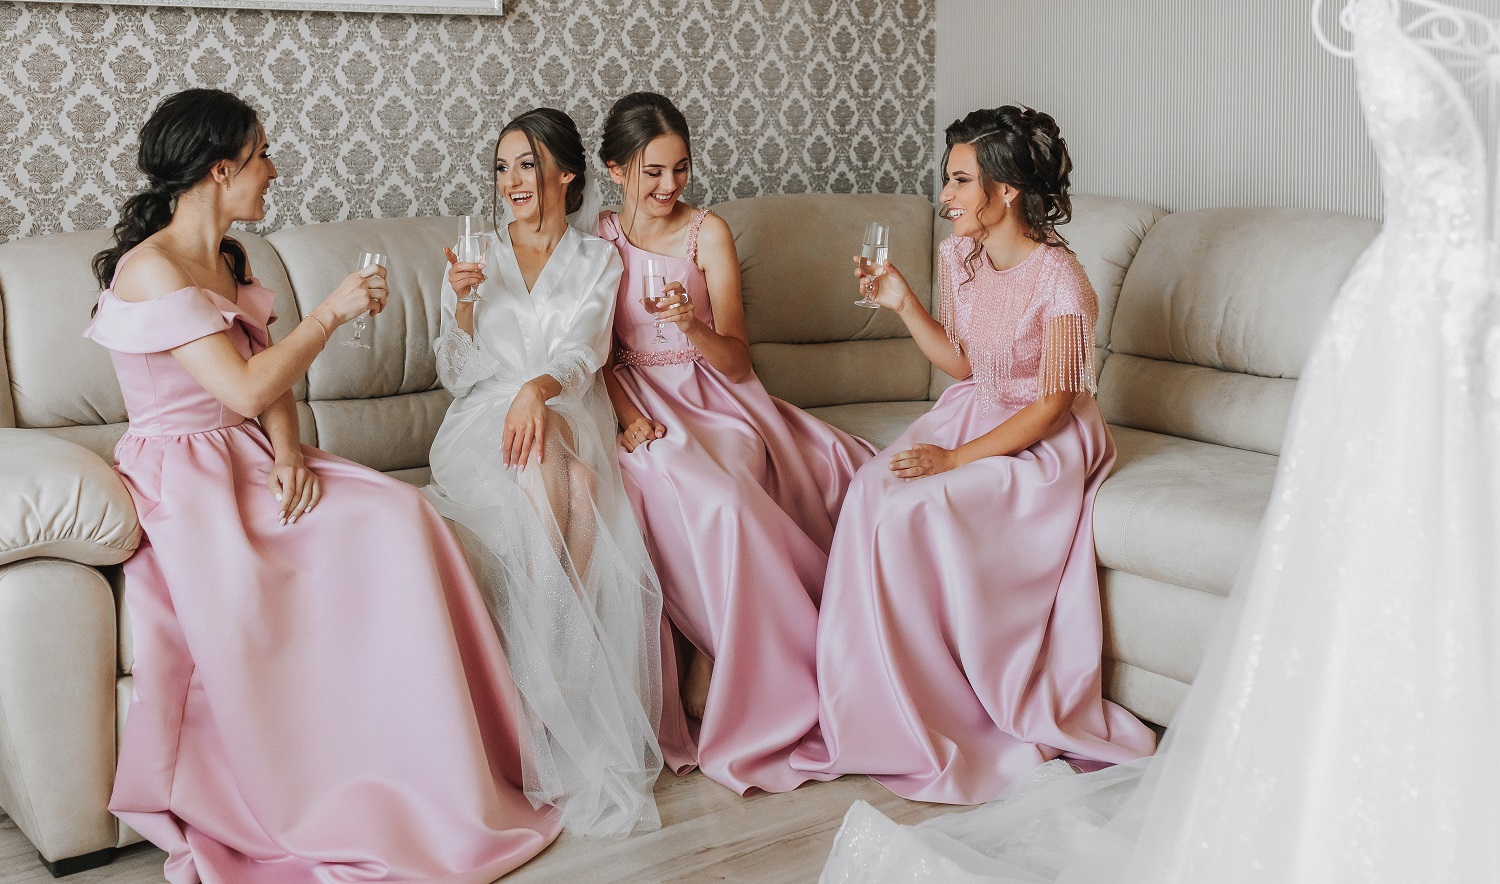 Stunningly gorgeous bridesmaids having a glass of champagne in the bridal suite at Kirkbrae country club in Rhode Island